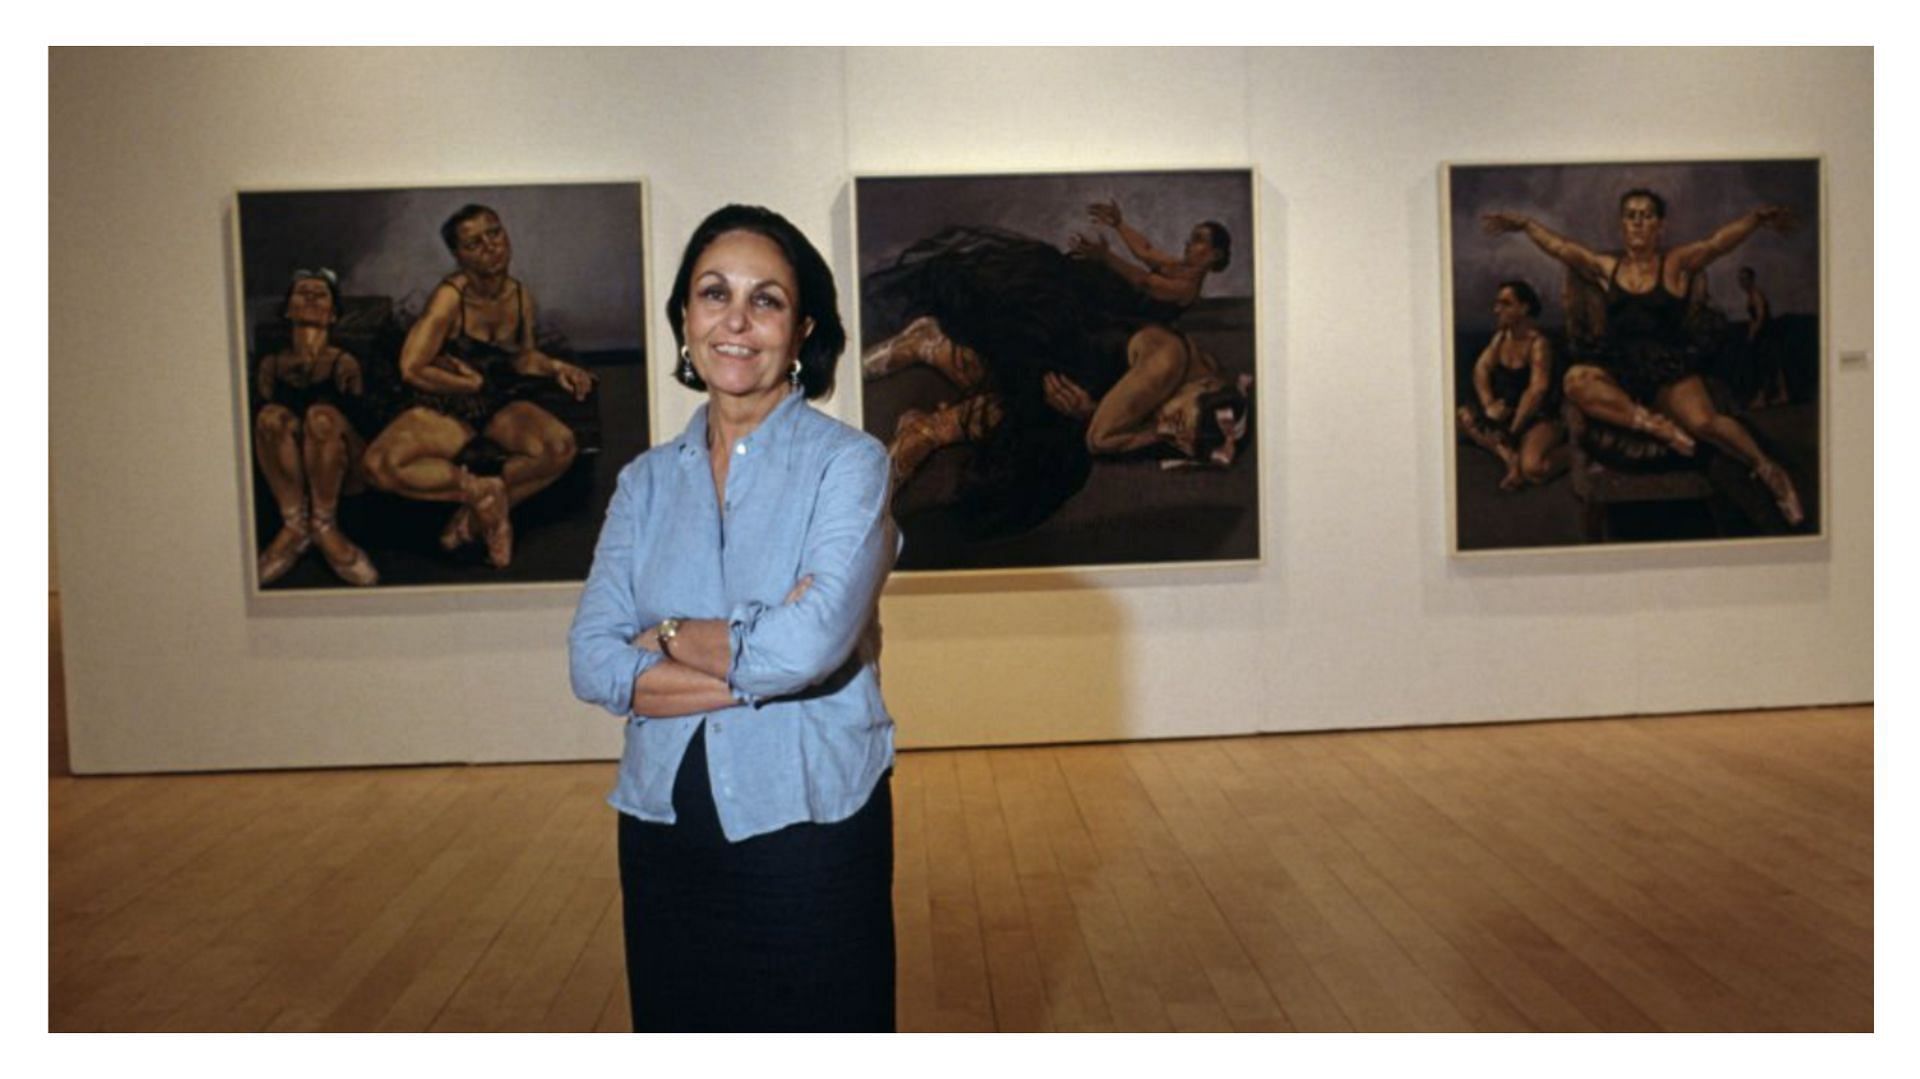 Dame Paula Rego recently died at the age of 87 (Image via Rita Barros/Getty Images)